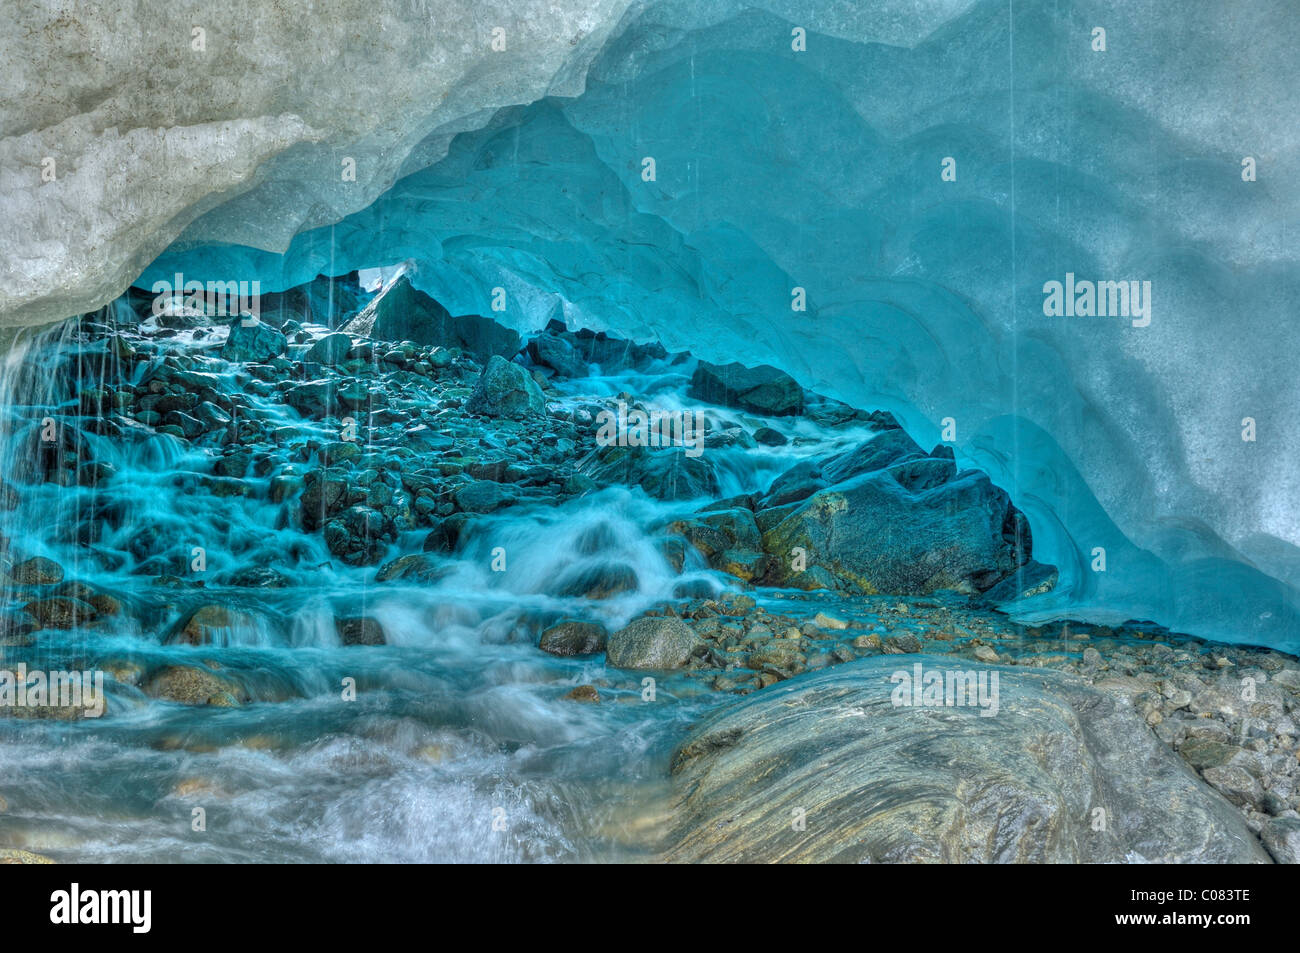 Ice cave at the Schlatenkees glacier, Nationalpark Hohe Tauern national park, Tyrol, Austria, Europe Stock Photo